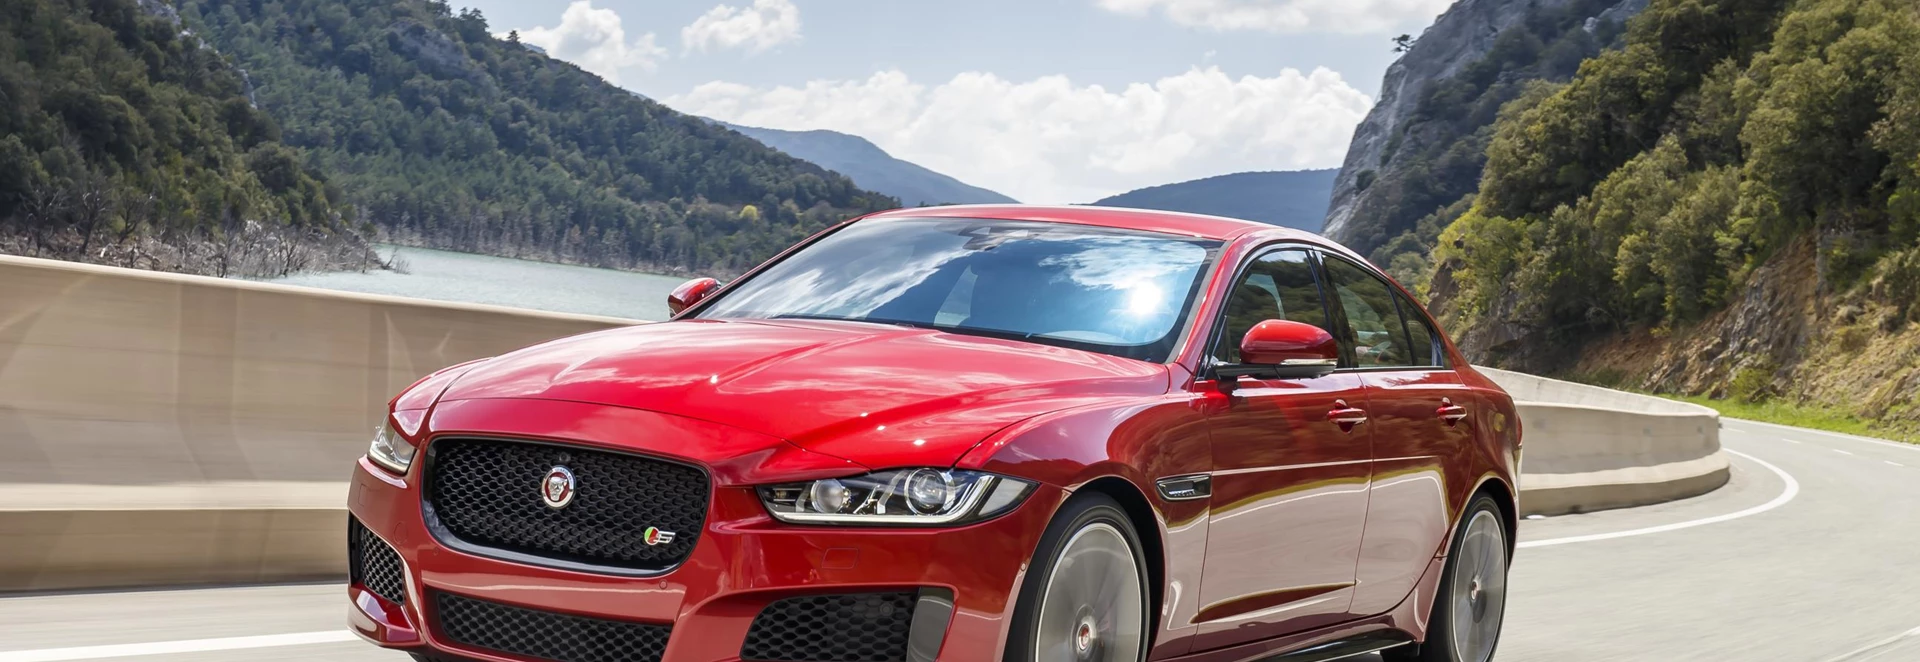 New 296bhp petrol engine for Jaguar XE, XF and F-PACE 